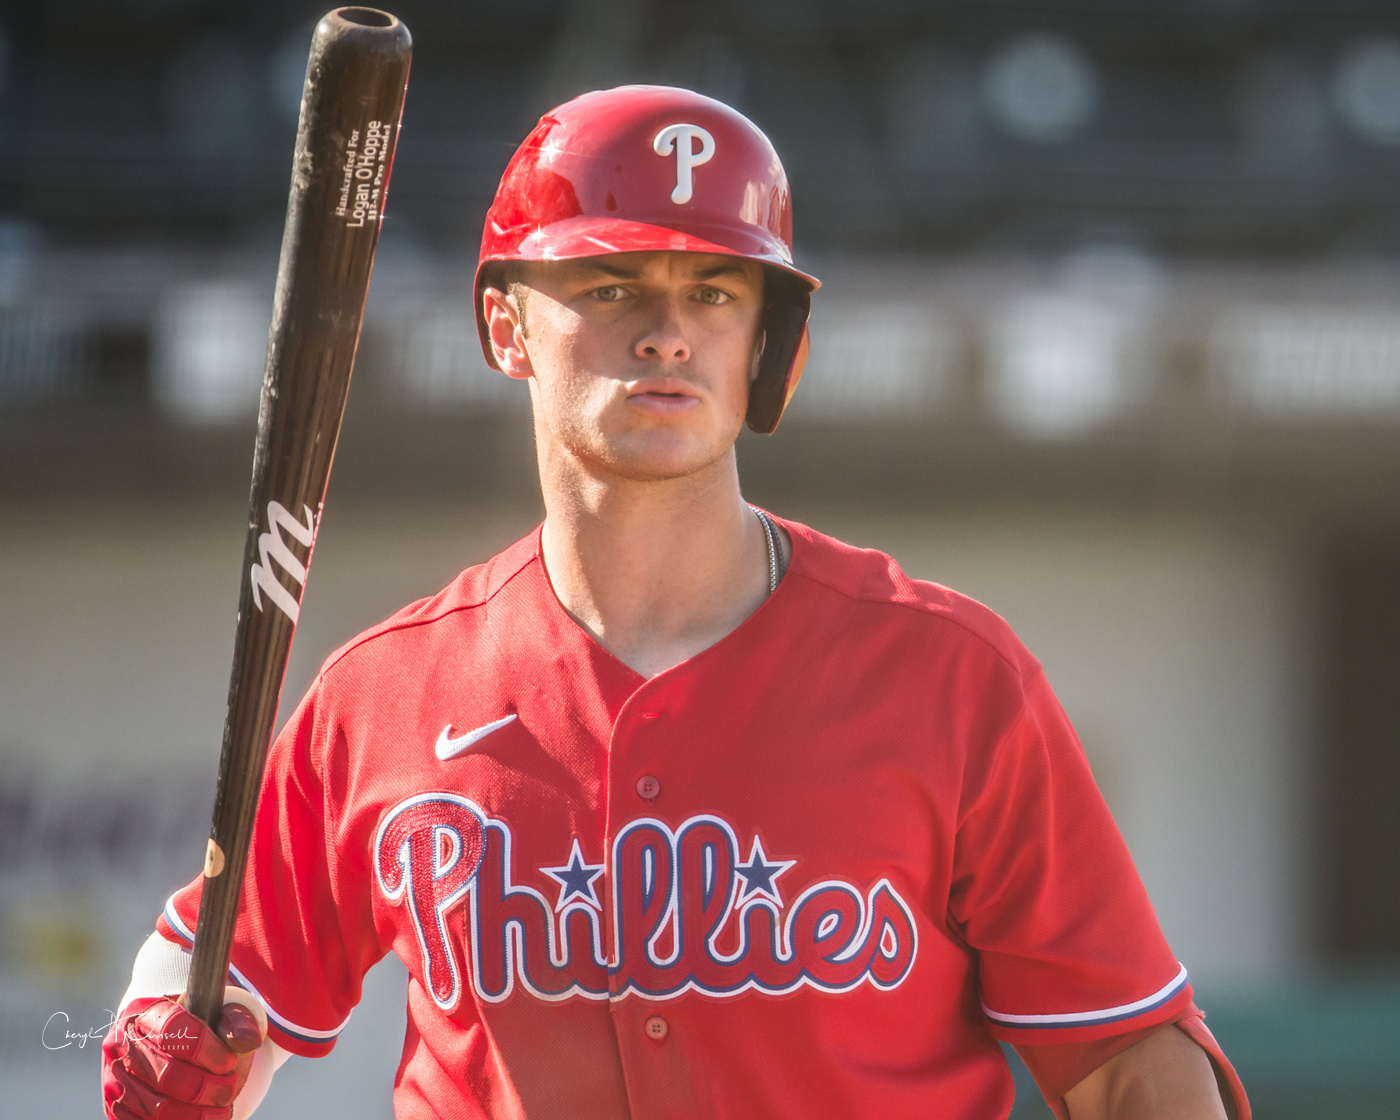 Phillies Catcher Logan O'Hoppe Had One Of The Happiest At-Bats In